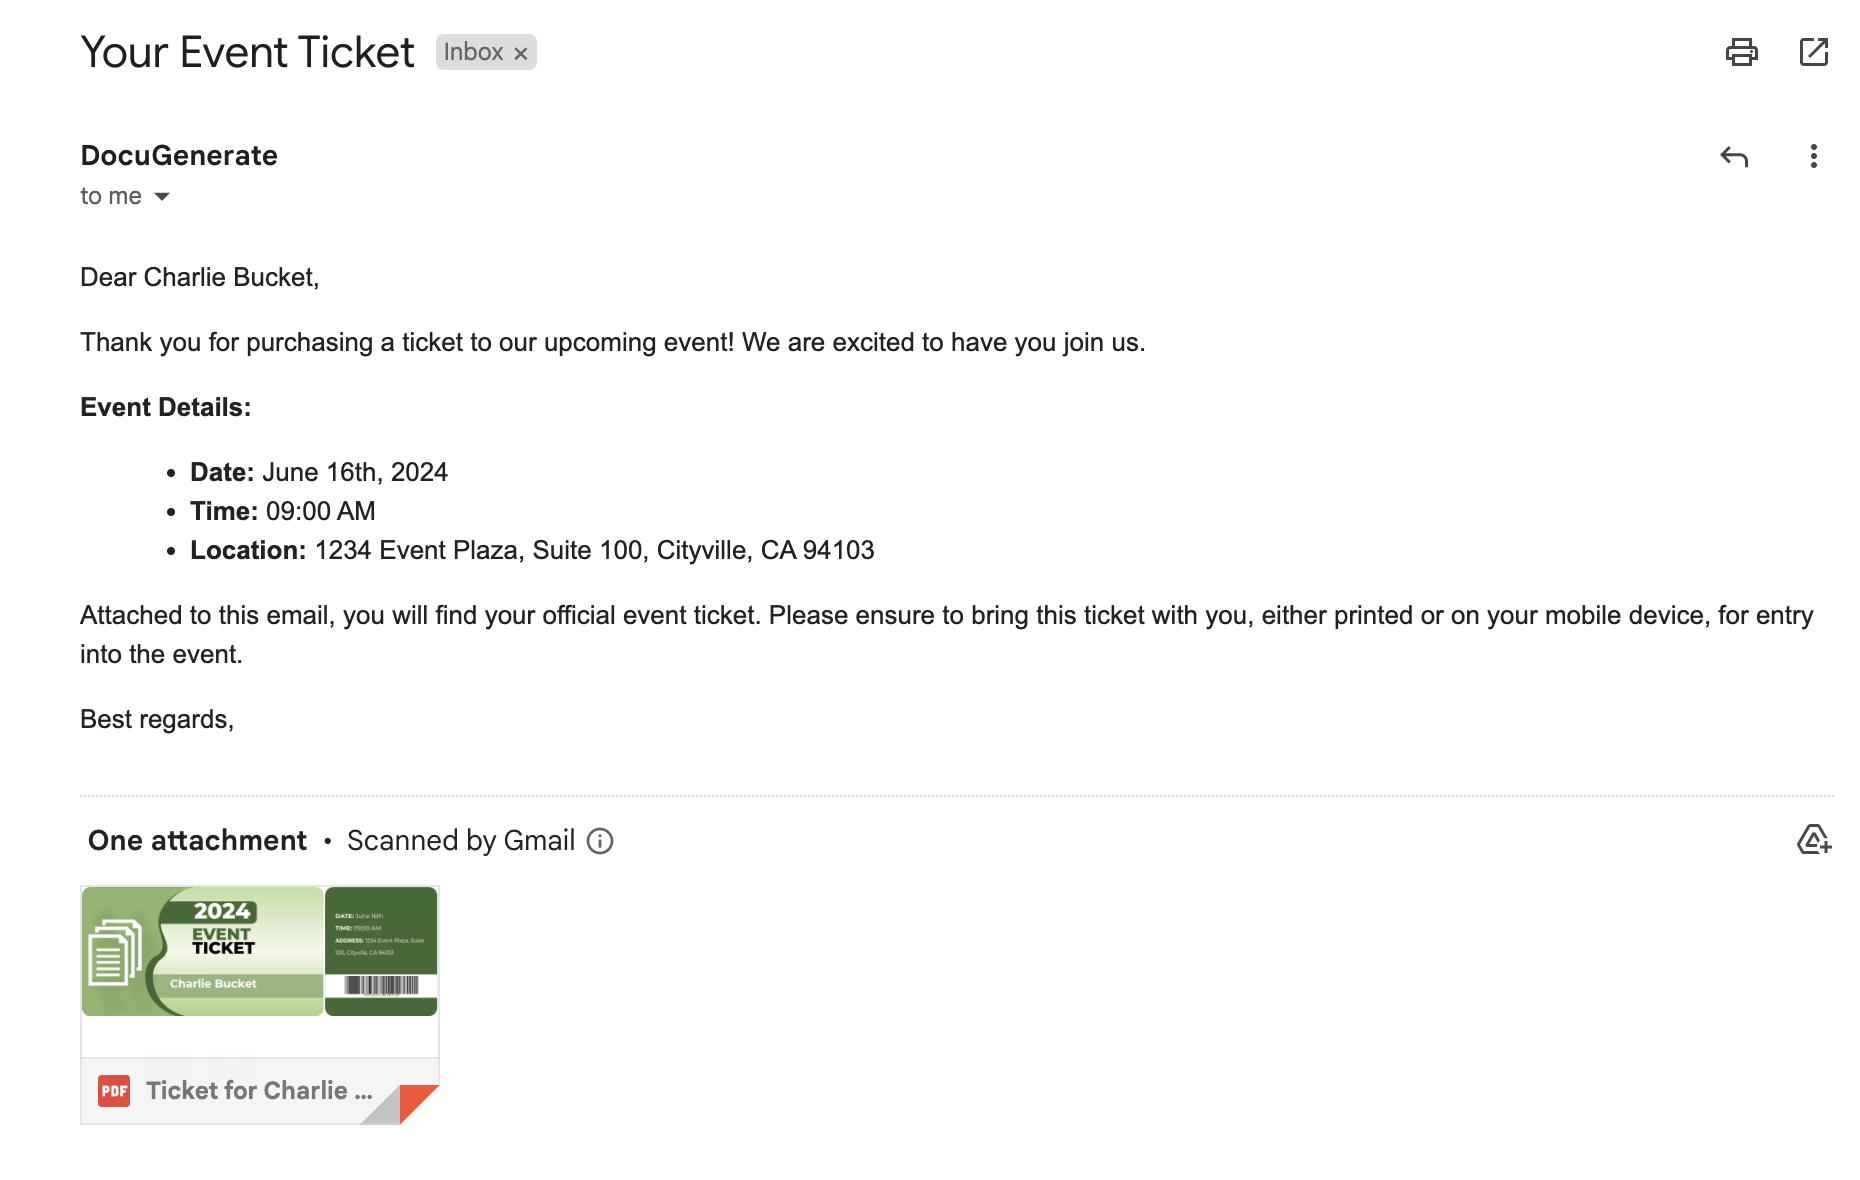 Email with the generated PDF ticket attached